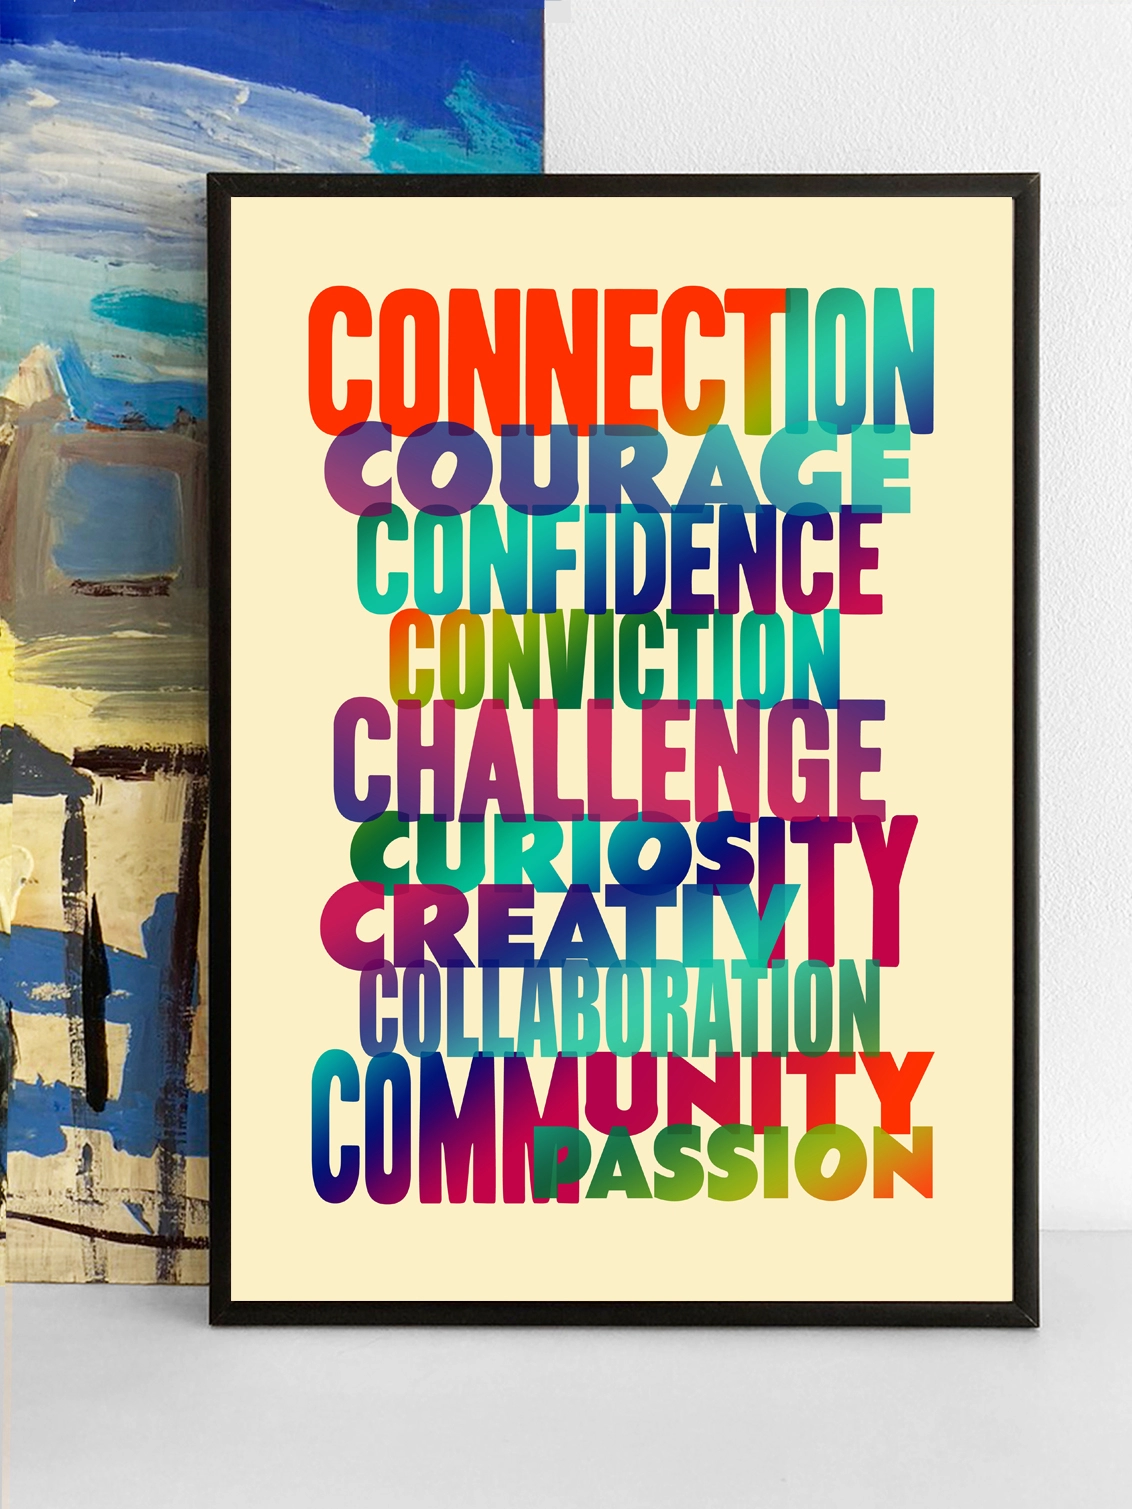 Framed multicoloured typographic print of “Connection Courage Confidence Conviction Challenge Curiosity Creativity Collaboration Community Compassion” Words by Shiobahn Sheridan  The print rests against a blue and yellow abstract painting.